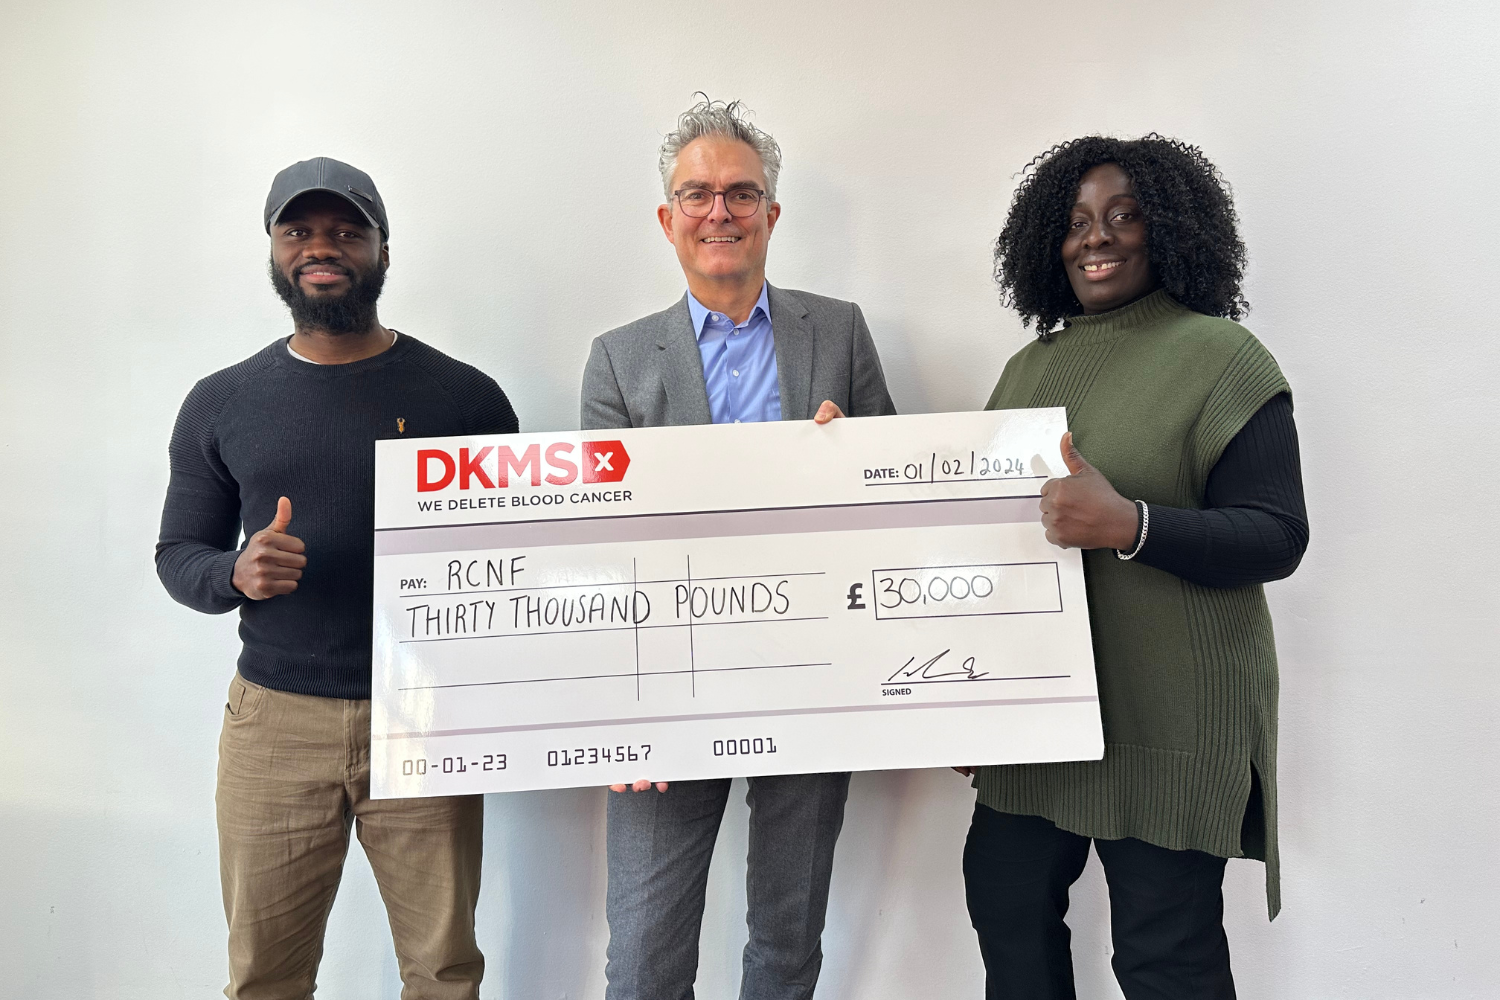 DKMS cheque donation